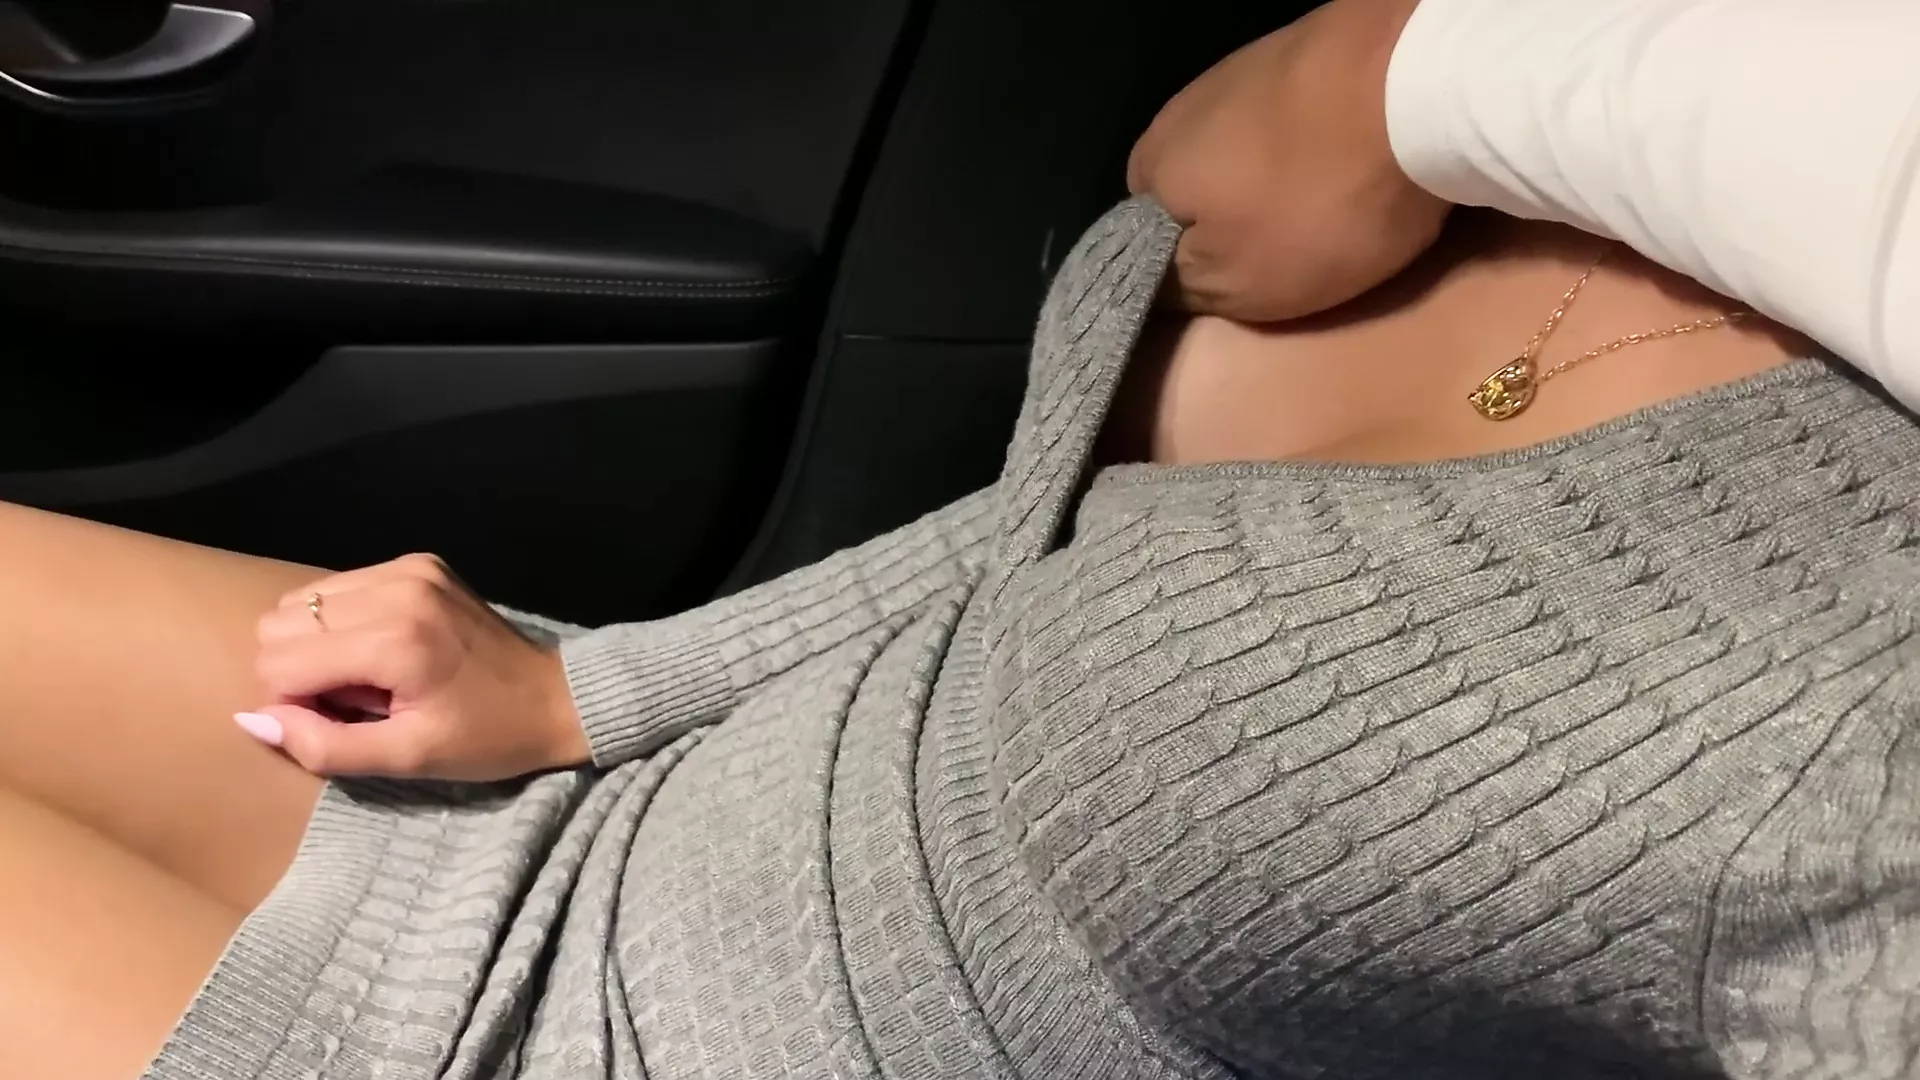 Blowjob in the car on the first date Porn Photo Hd